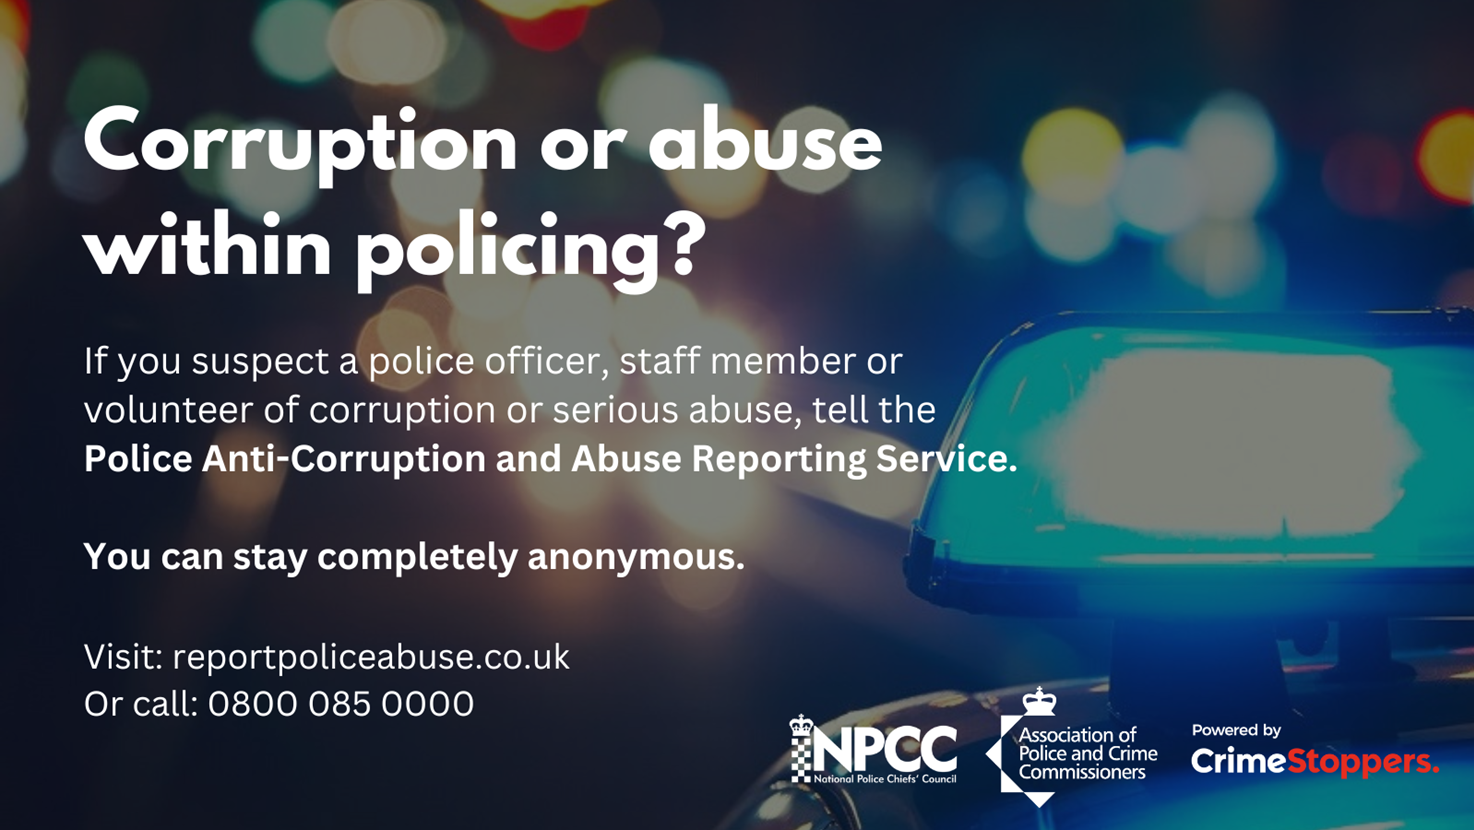 Lincolnshire Police and PCC Marc Jones launch national Police Anti-Corruption and Abuse Reporting Service  